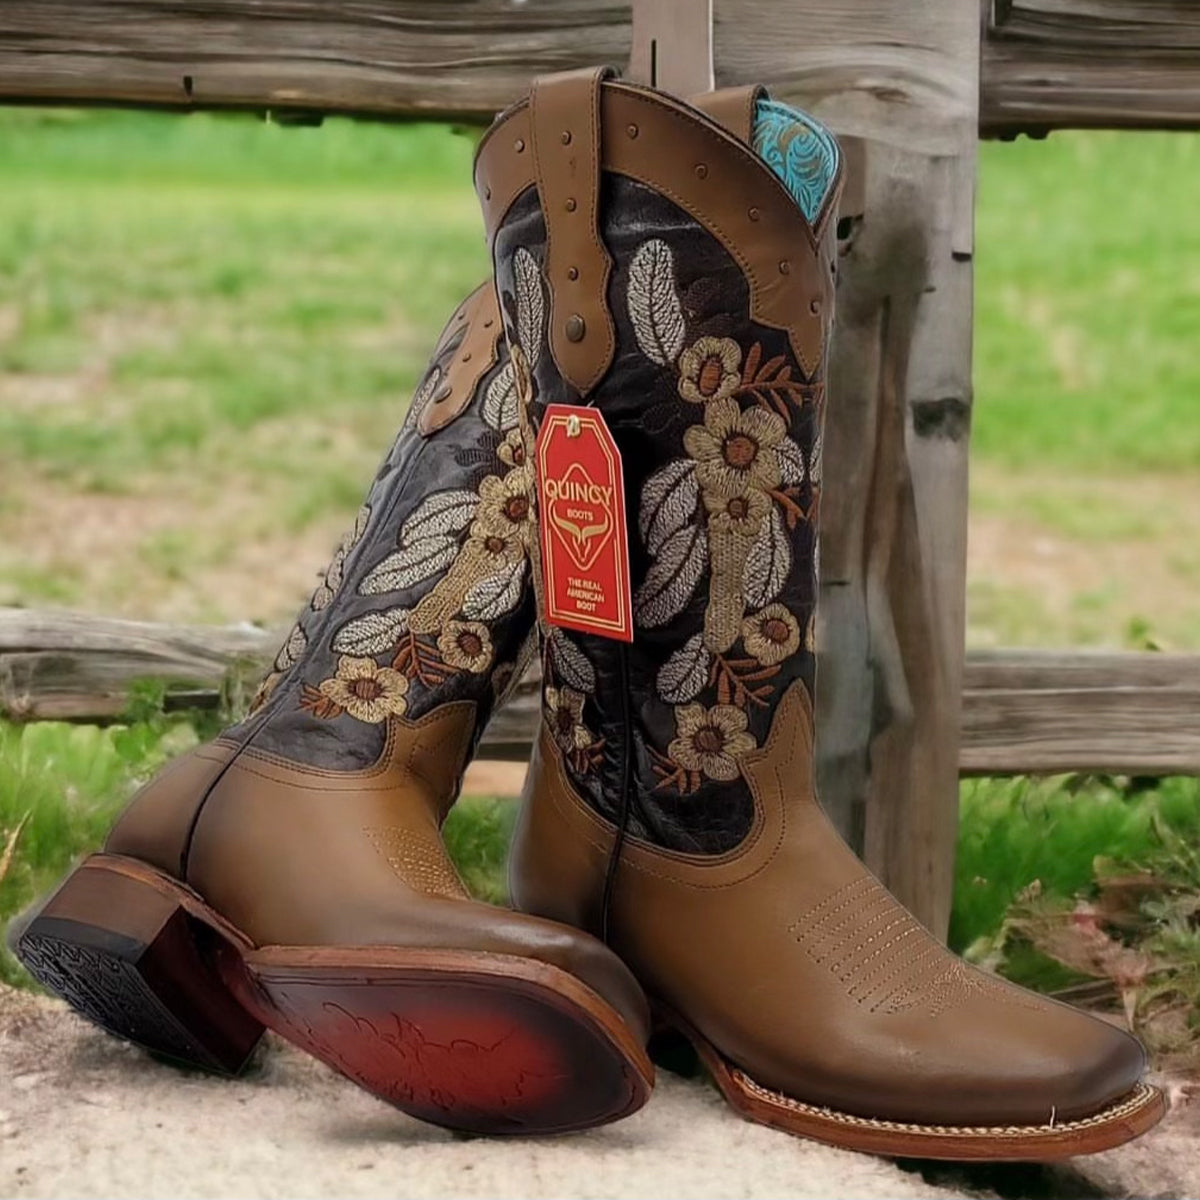 Flowered Embroidered Cowgirl Boots